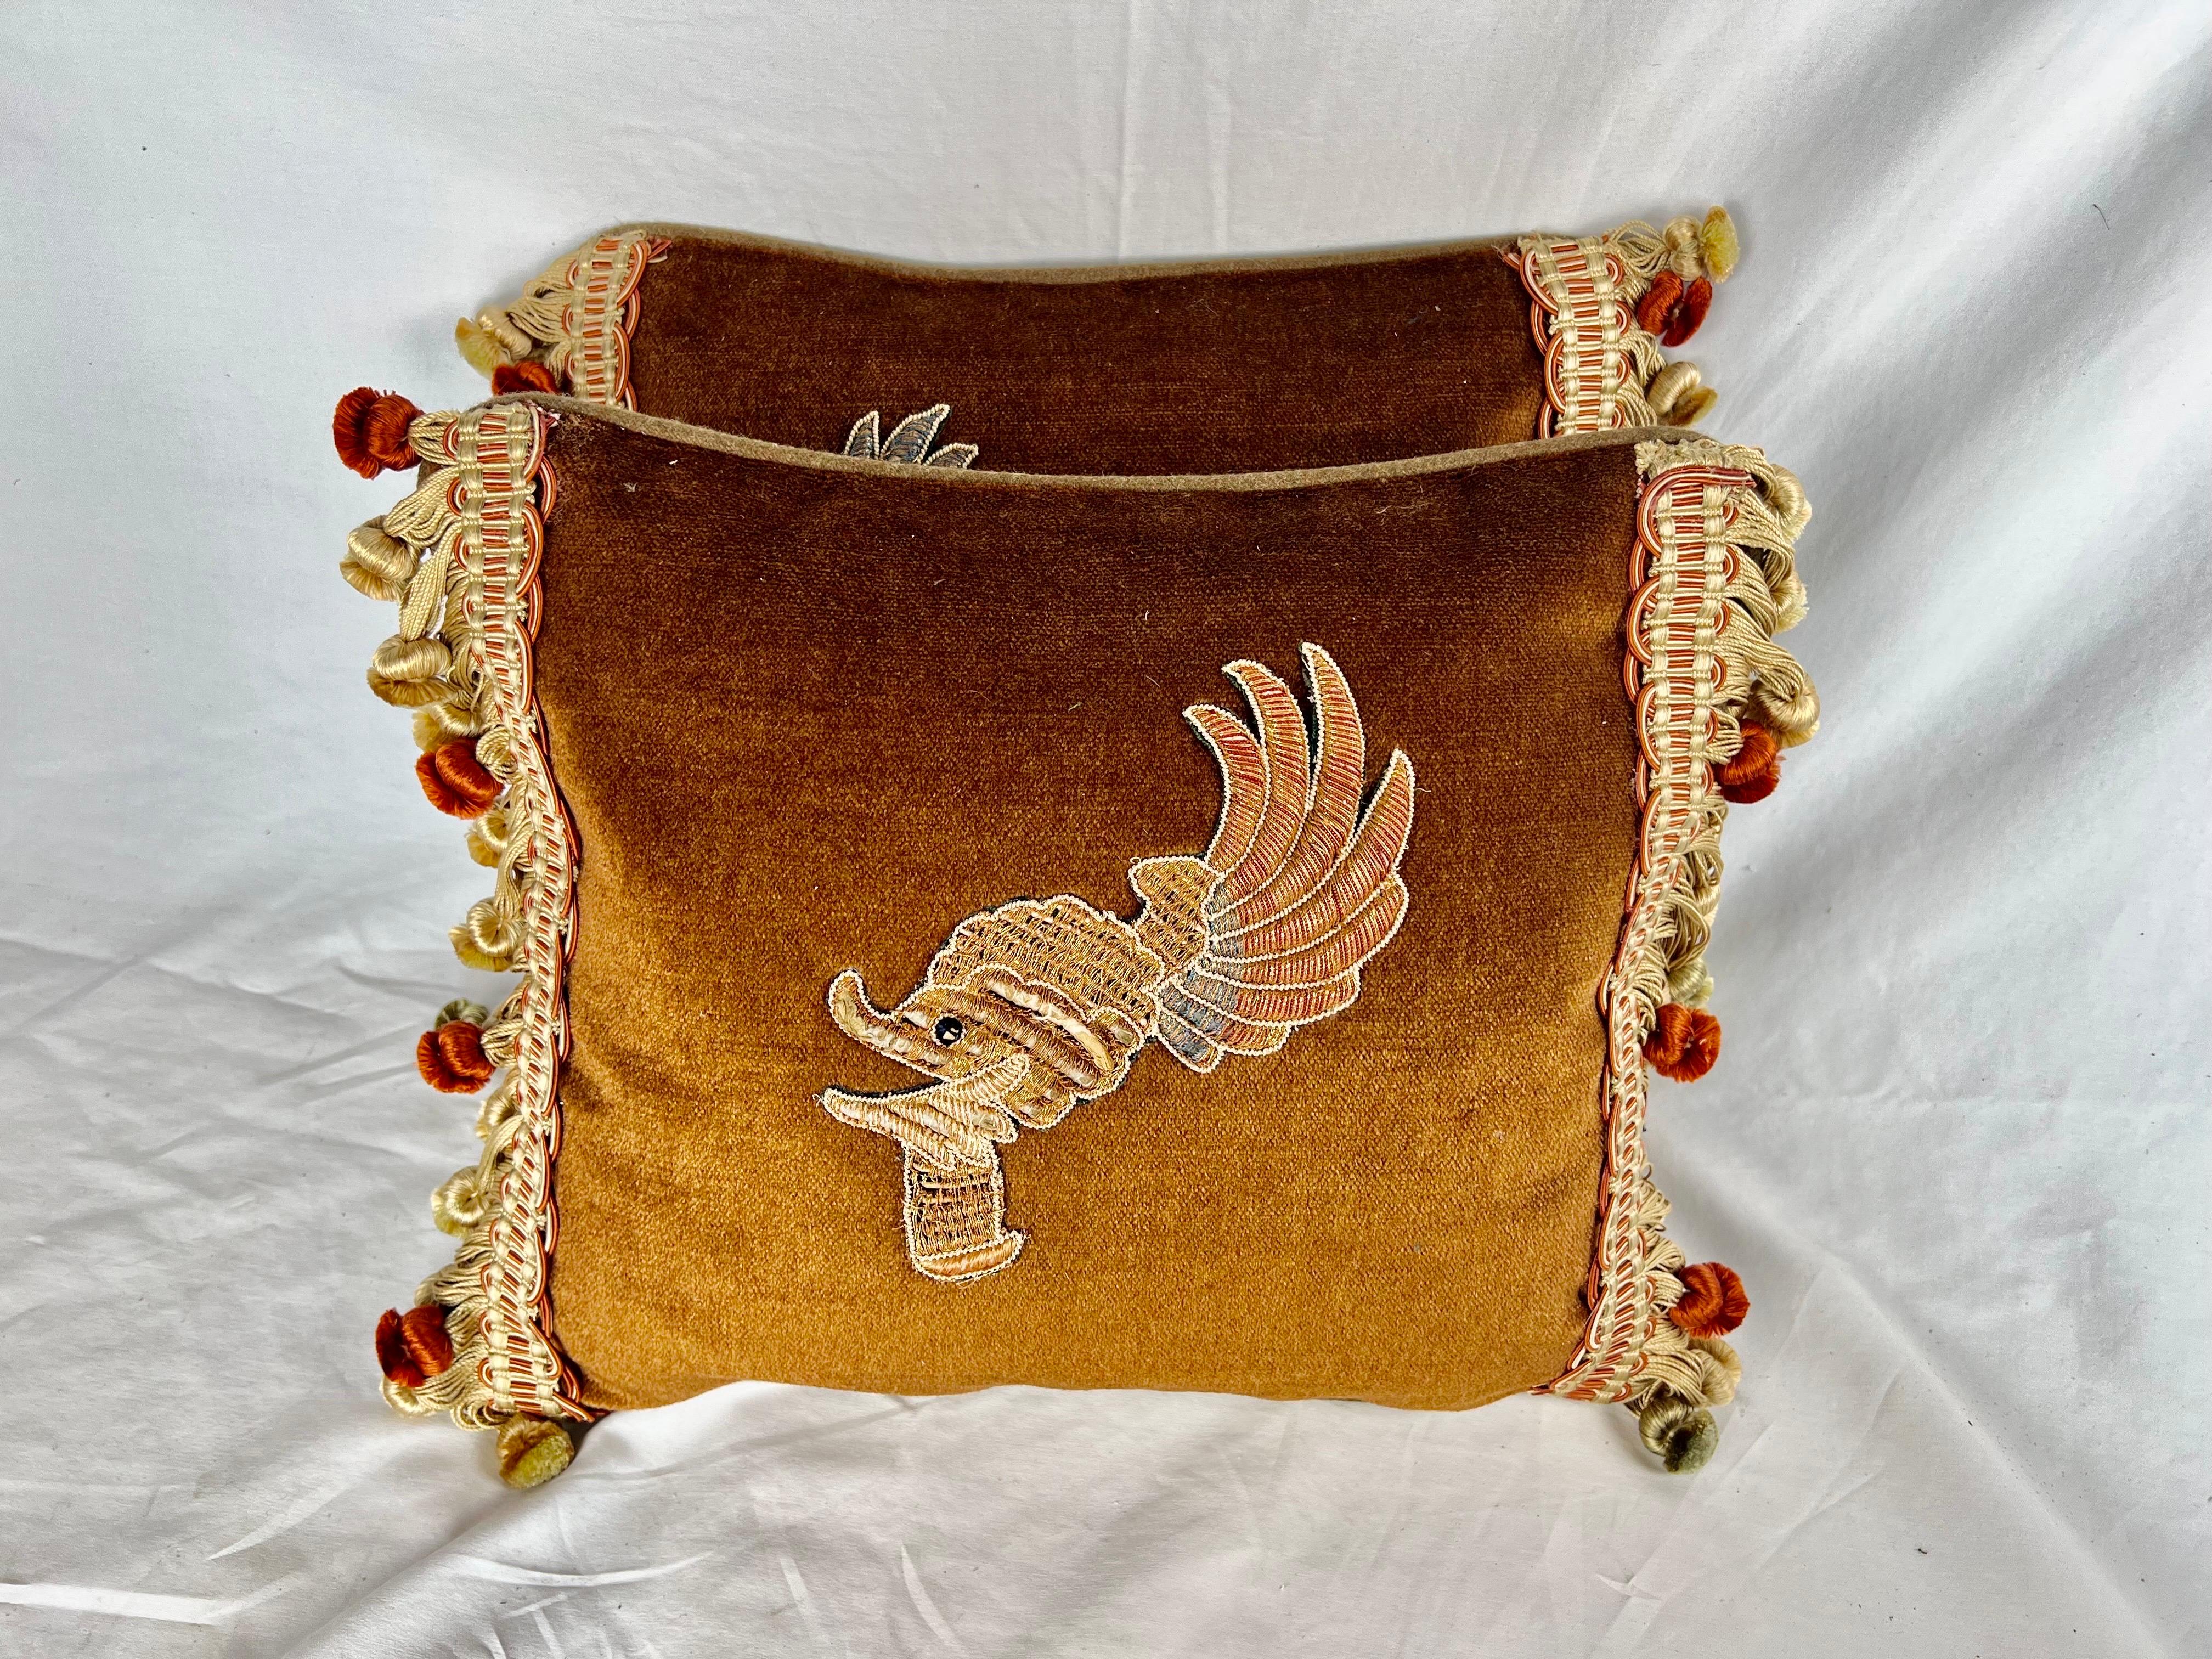 Pair of custom pillows made with 19th century metallic & silk embroidered appliques.  The appliques resemble an ostrich with feathers.  The fronts are a rust silk mohair and the backs a brown linen. Down inserts, zipper closures.